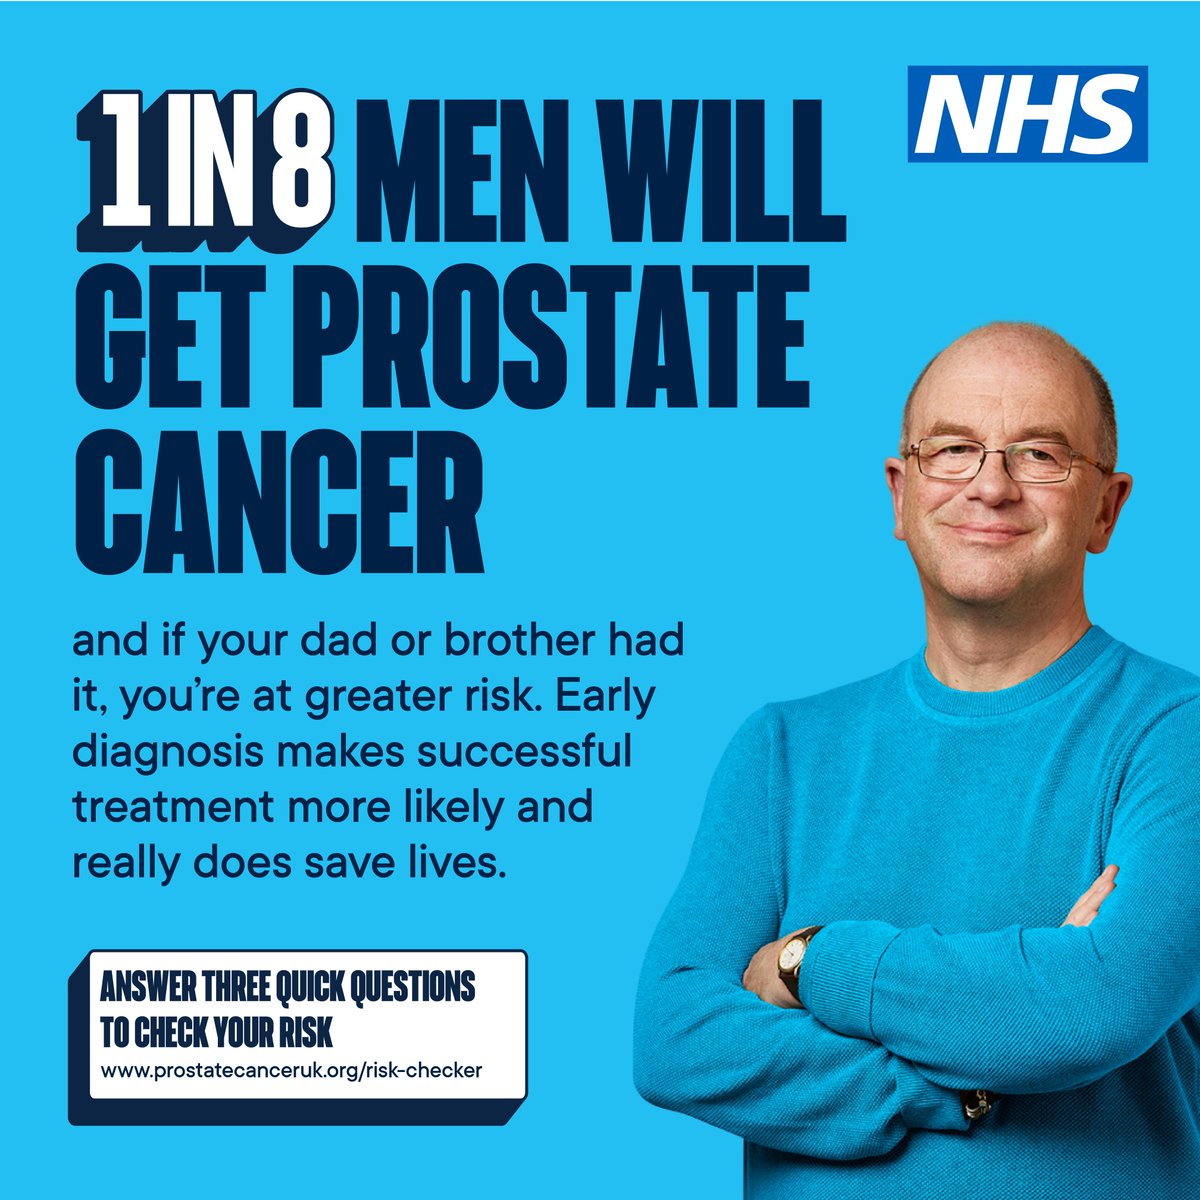 As part of #ProstateCancerAwarenessMonth. Encourage your dad, brother, uncle, partner, or best mate to check their risk in 30 seconds with the Prostate Cancer UK risk checker. 1 in 8 men will get prostate cancer. Early diagnosis saves lives.